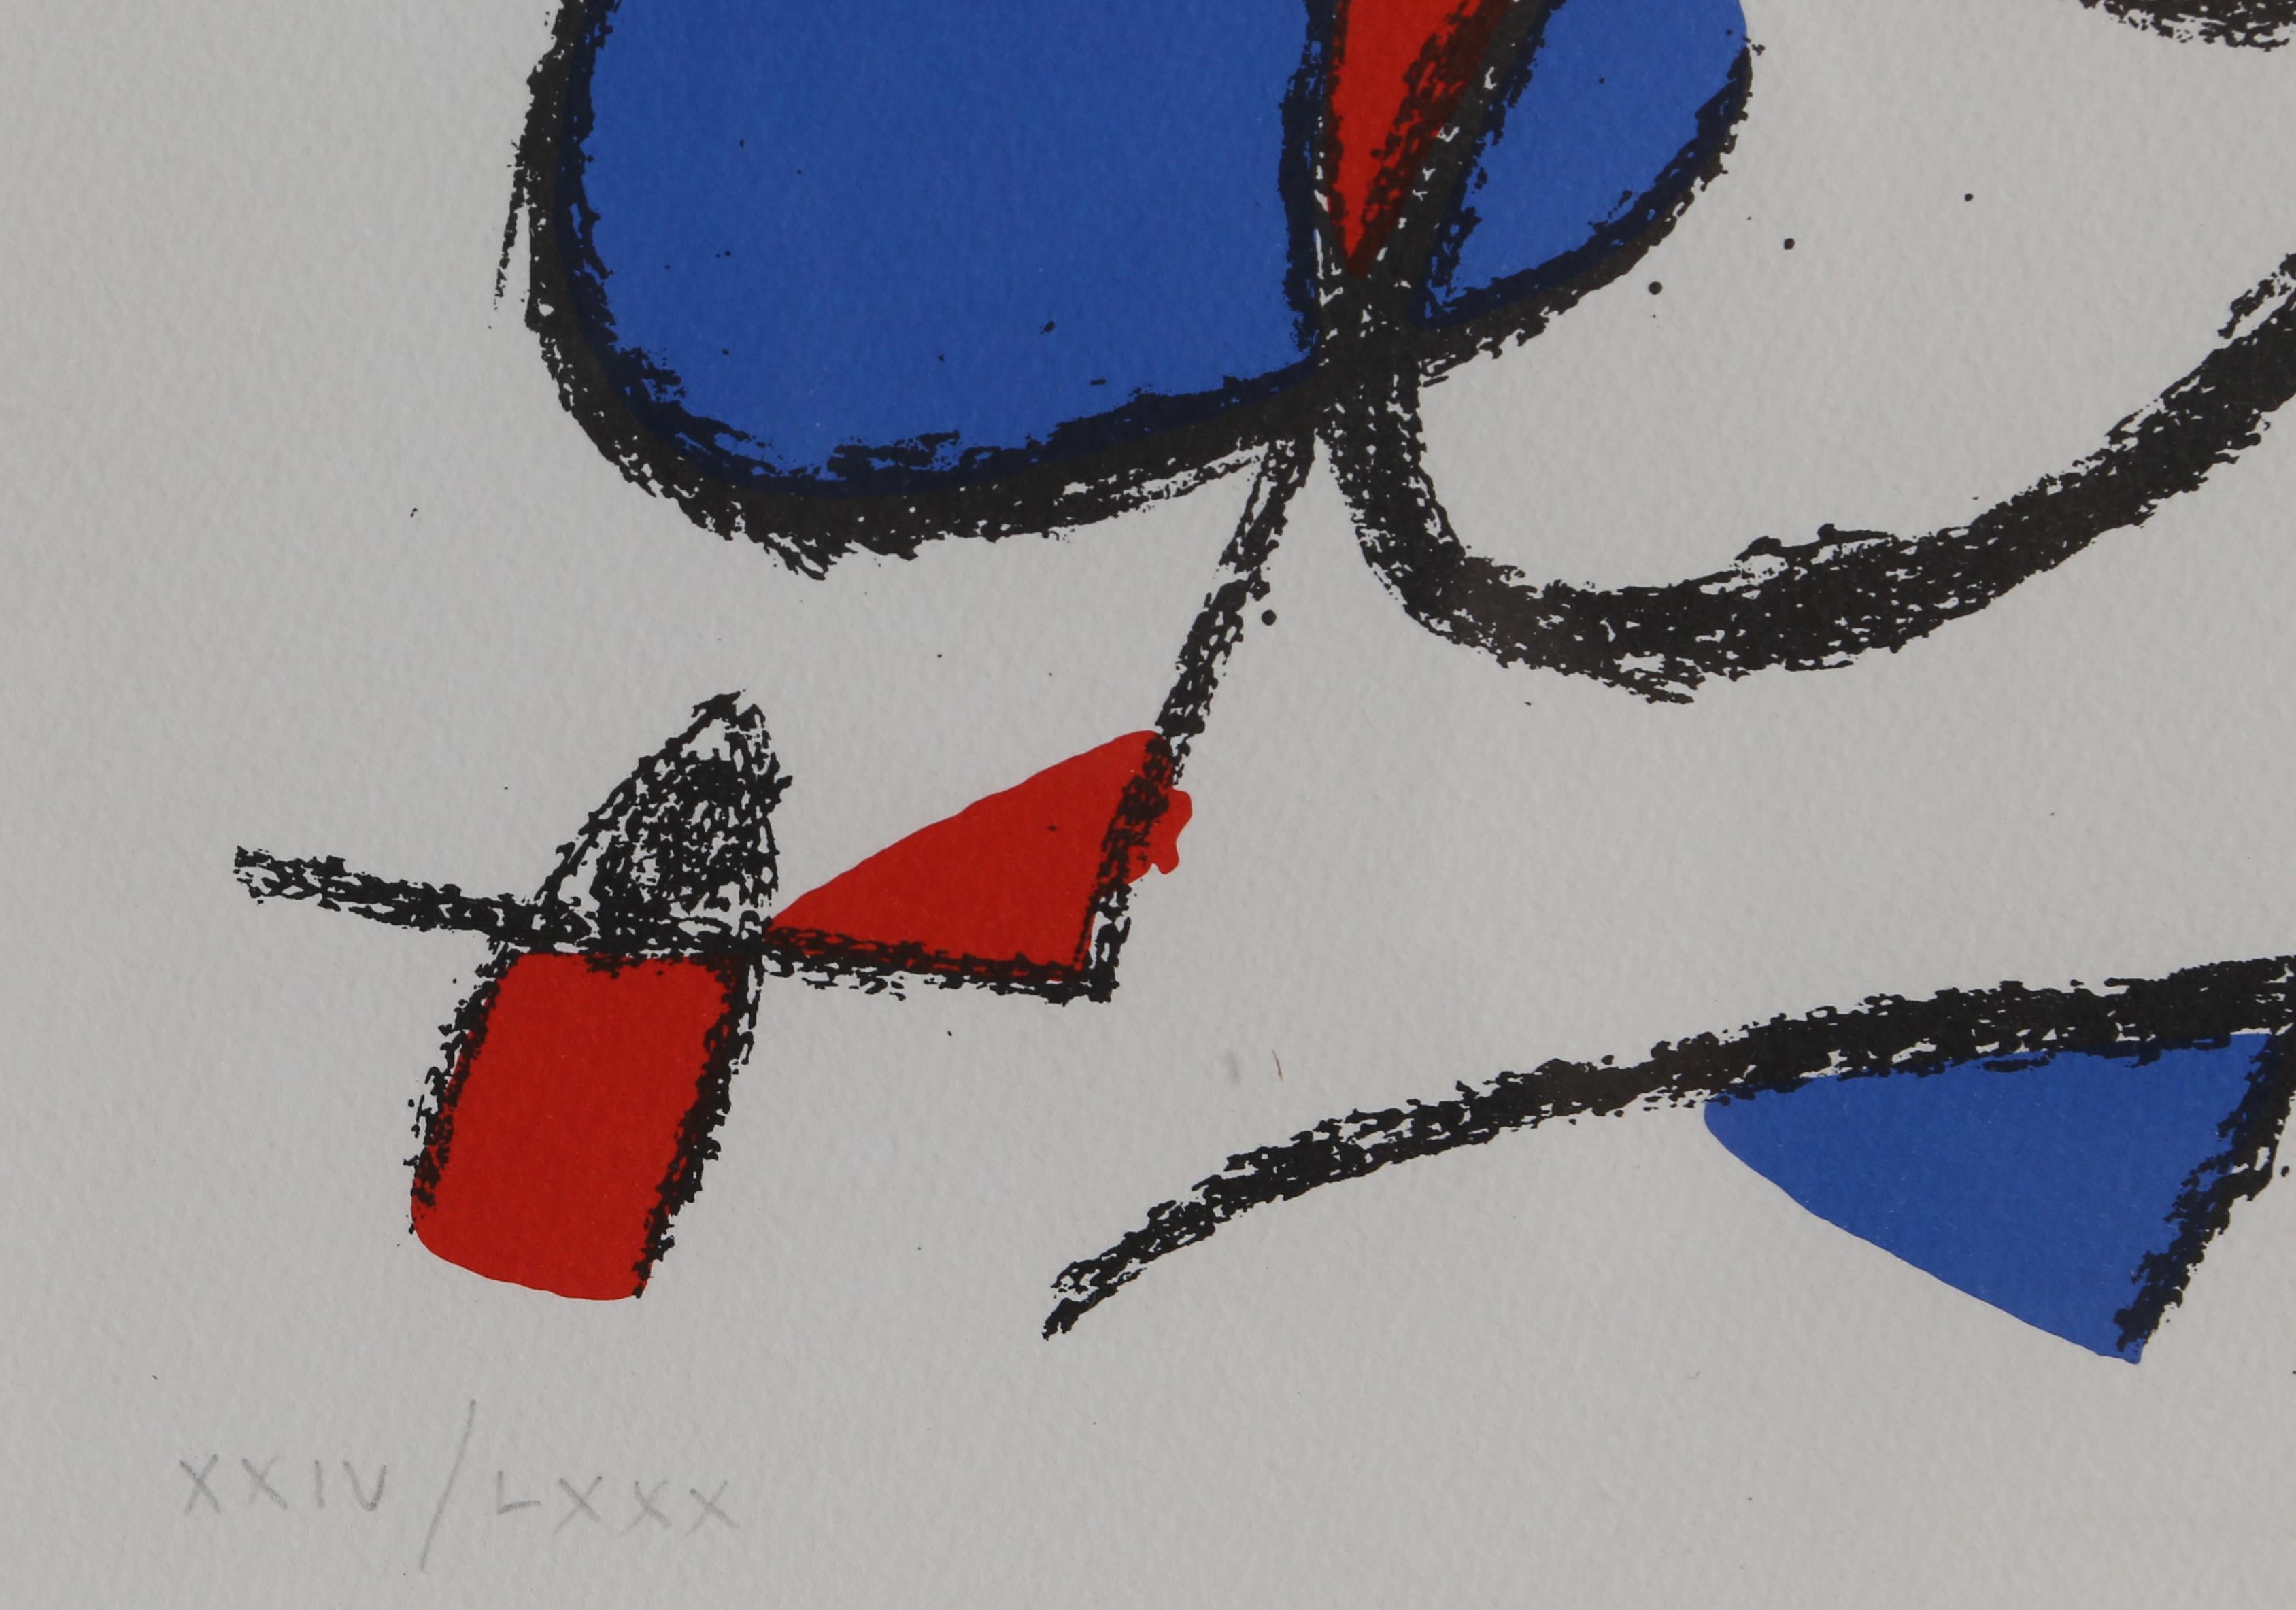 Lithographs II (M. 1044), by Joan Miró 1